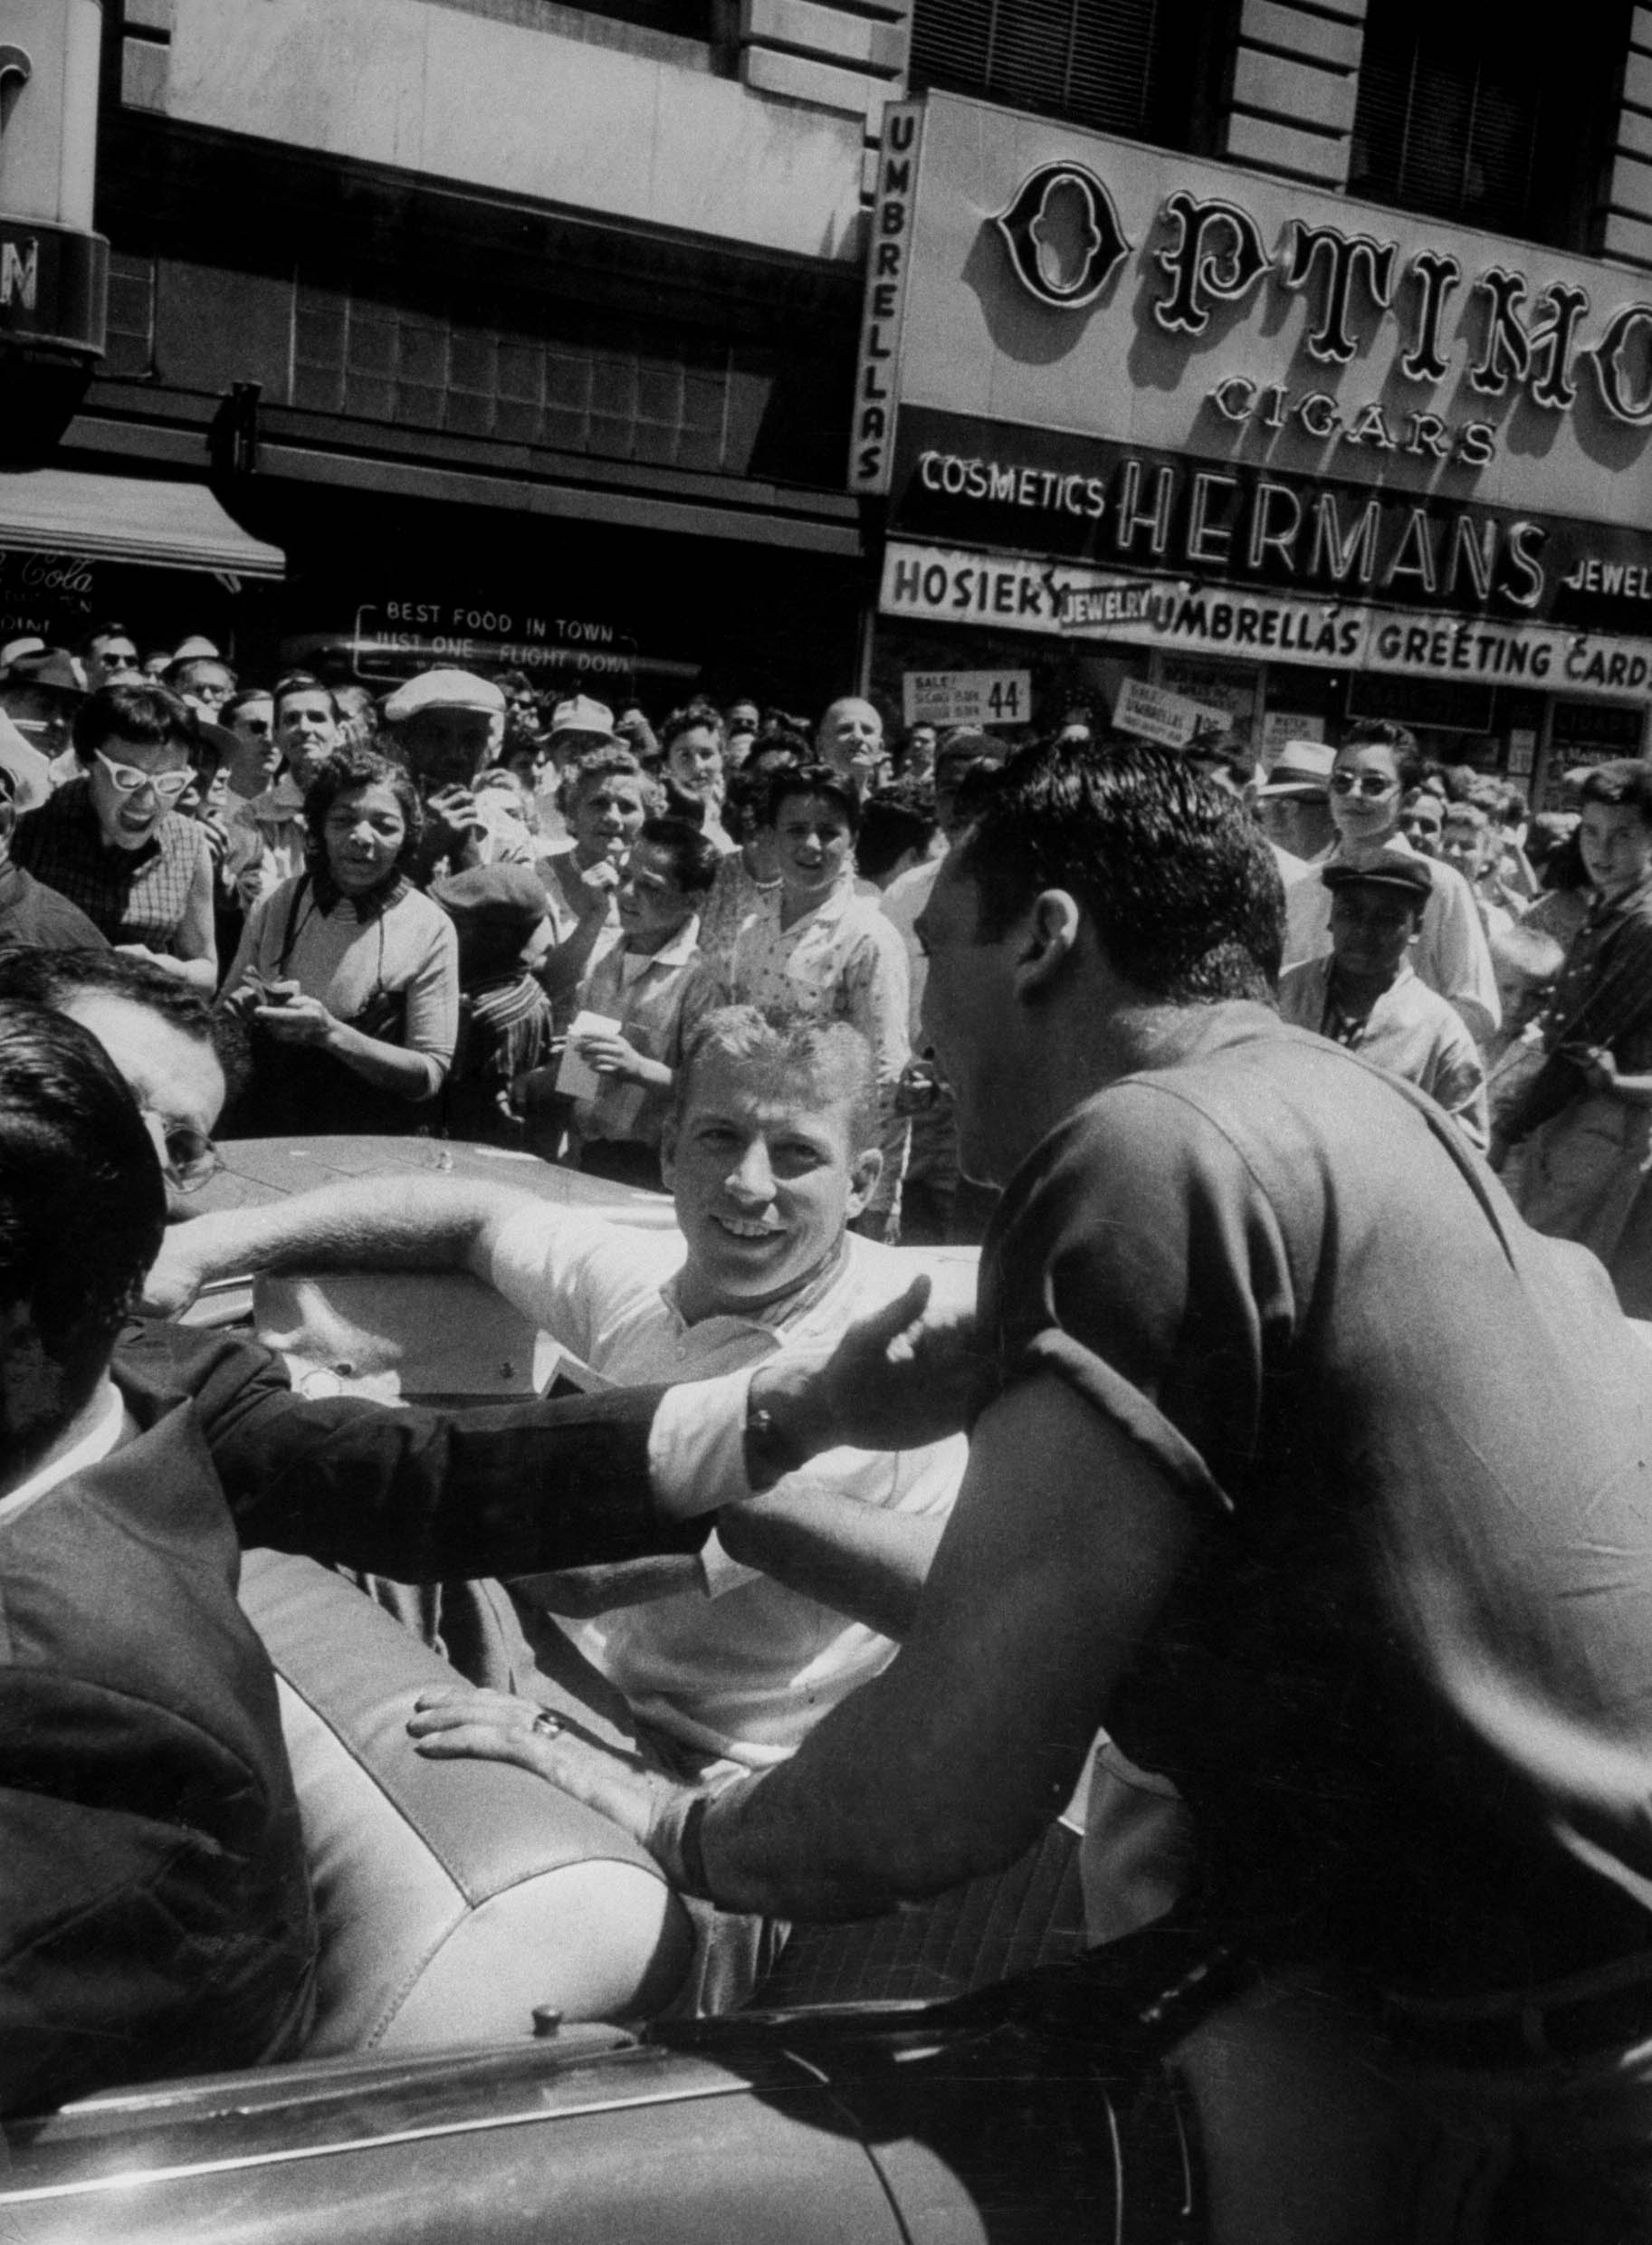 Mickey Mantle in a convertible during a New York parade in June 1956.